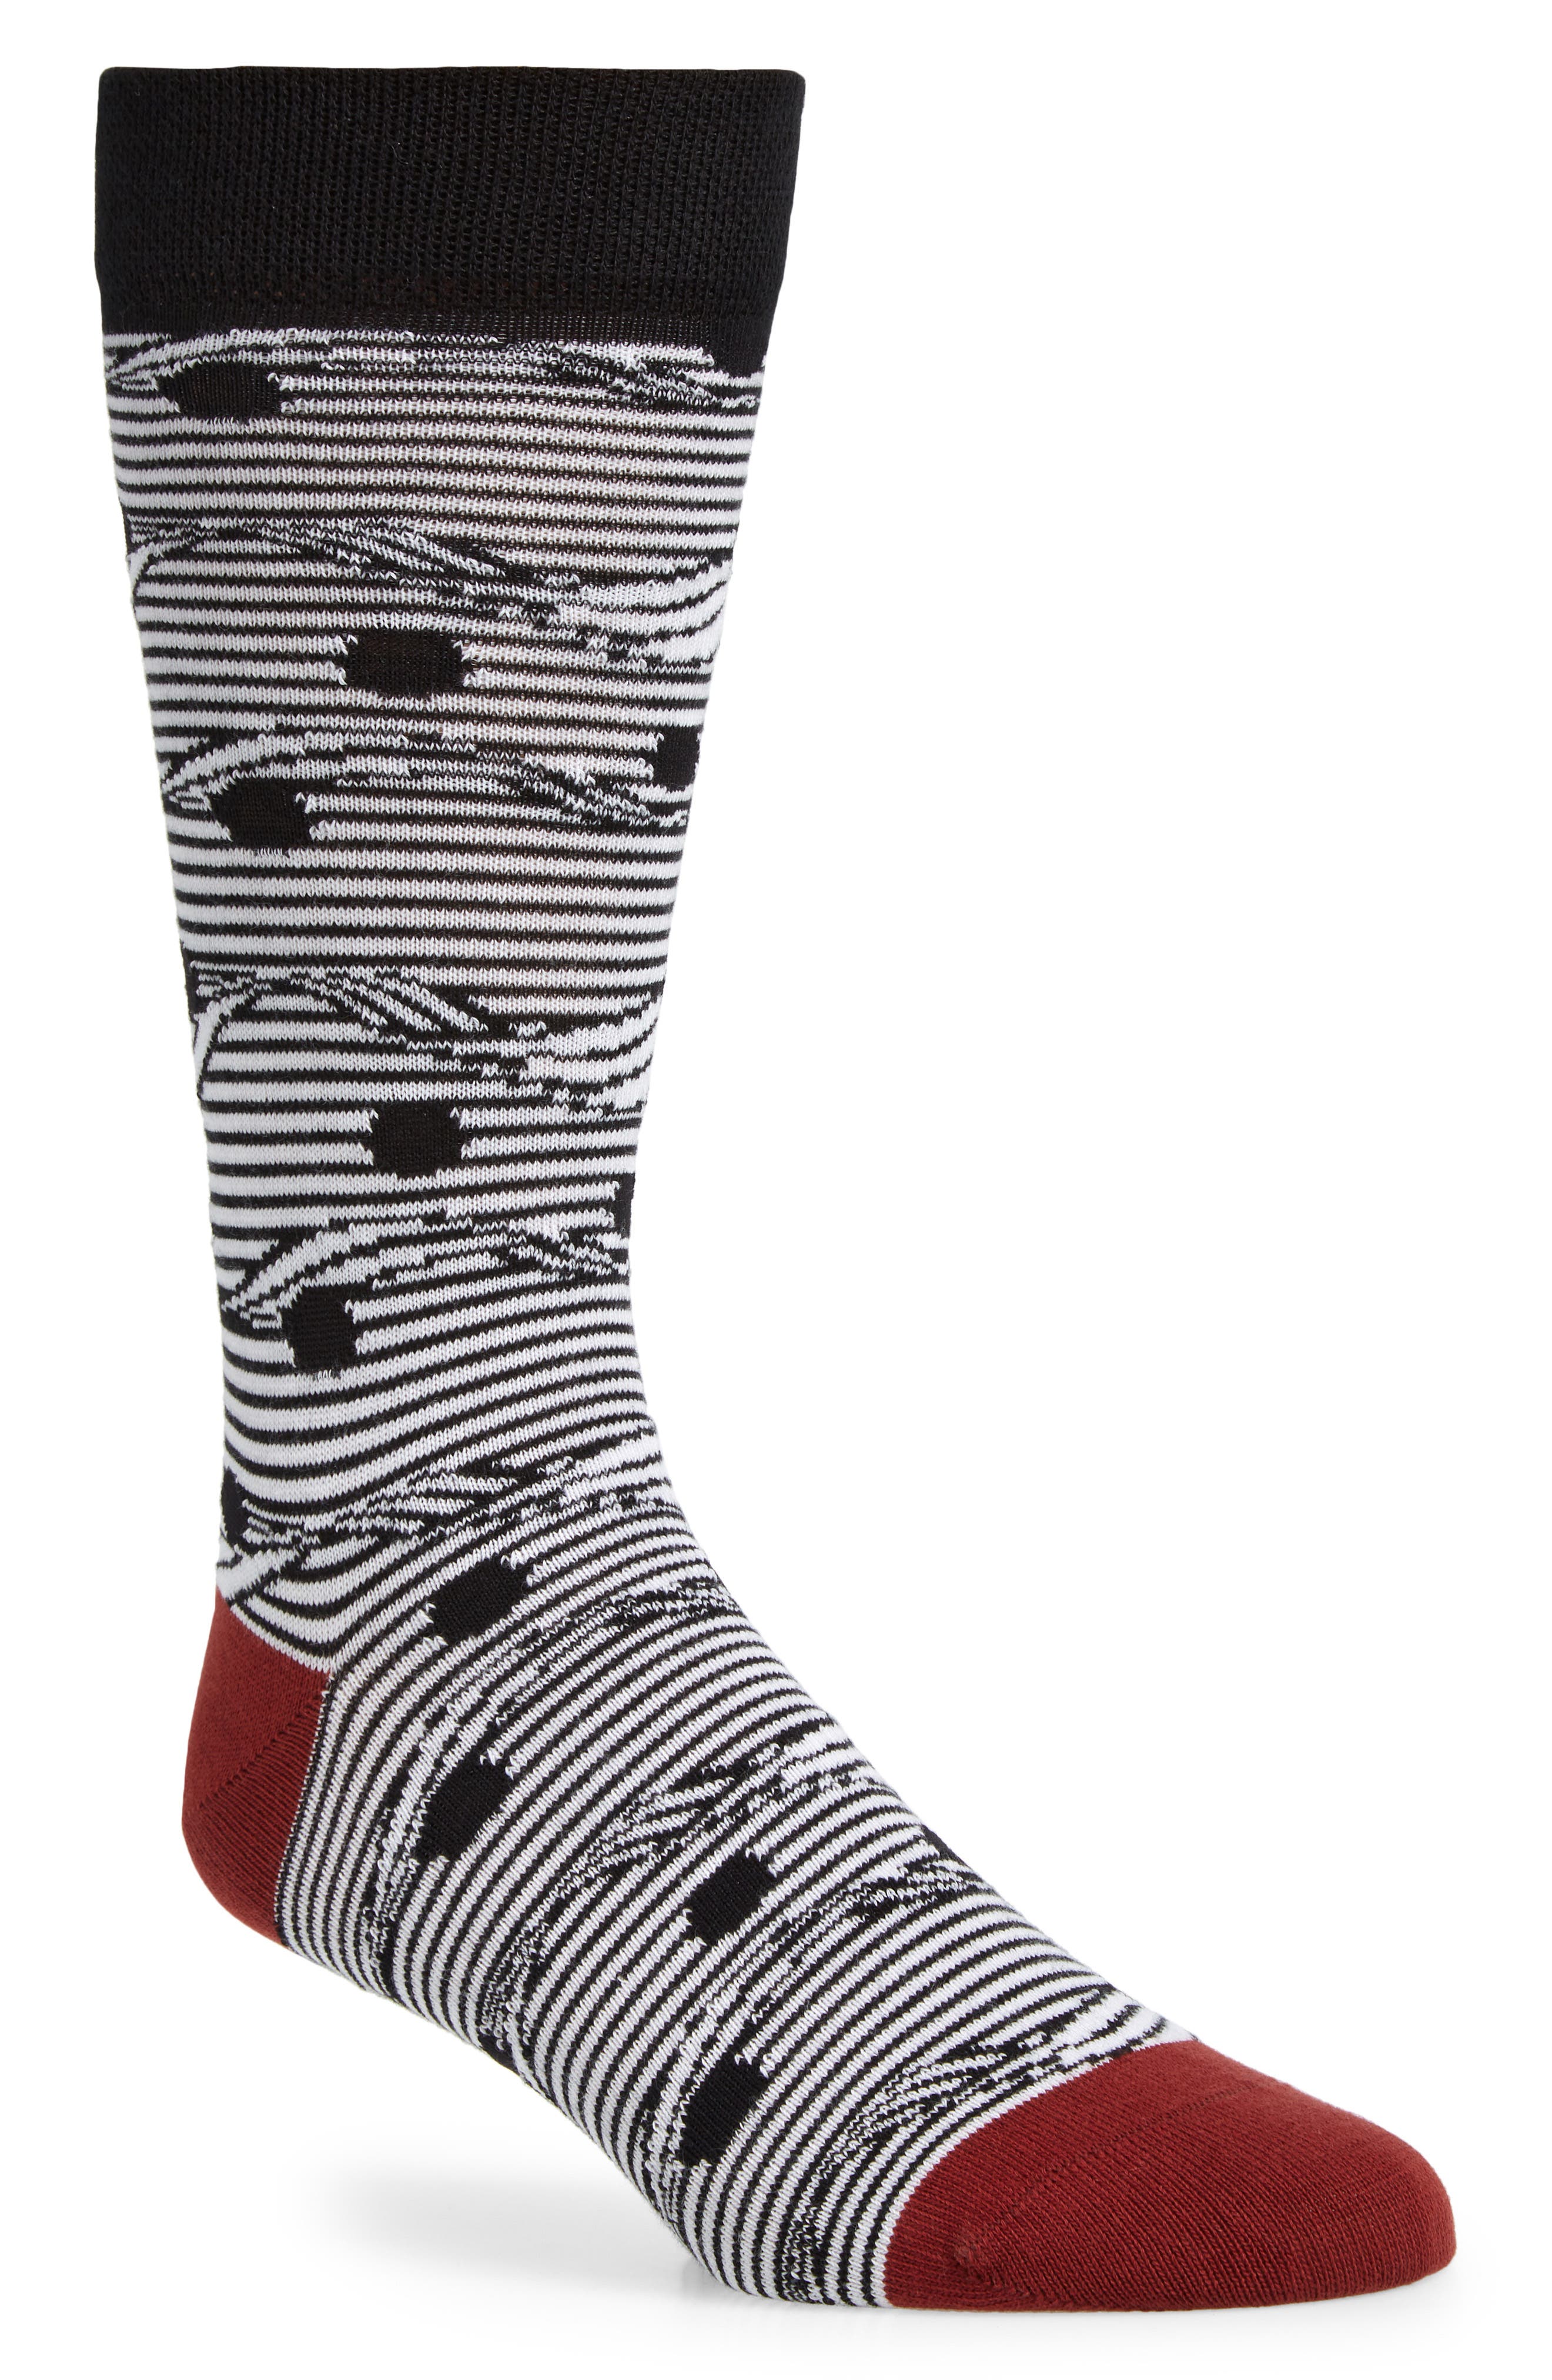 Mens Athletic Cushion Crew Sock Snake Texture Skin In Black And White Long Sock Sports 